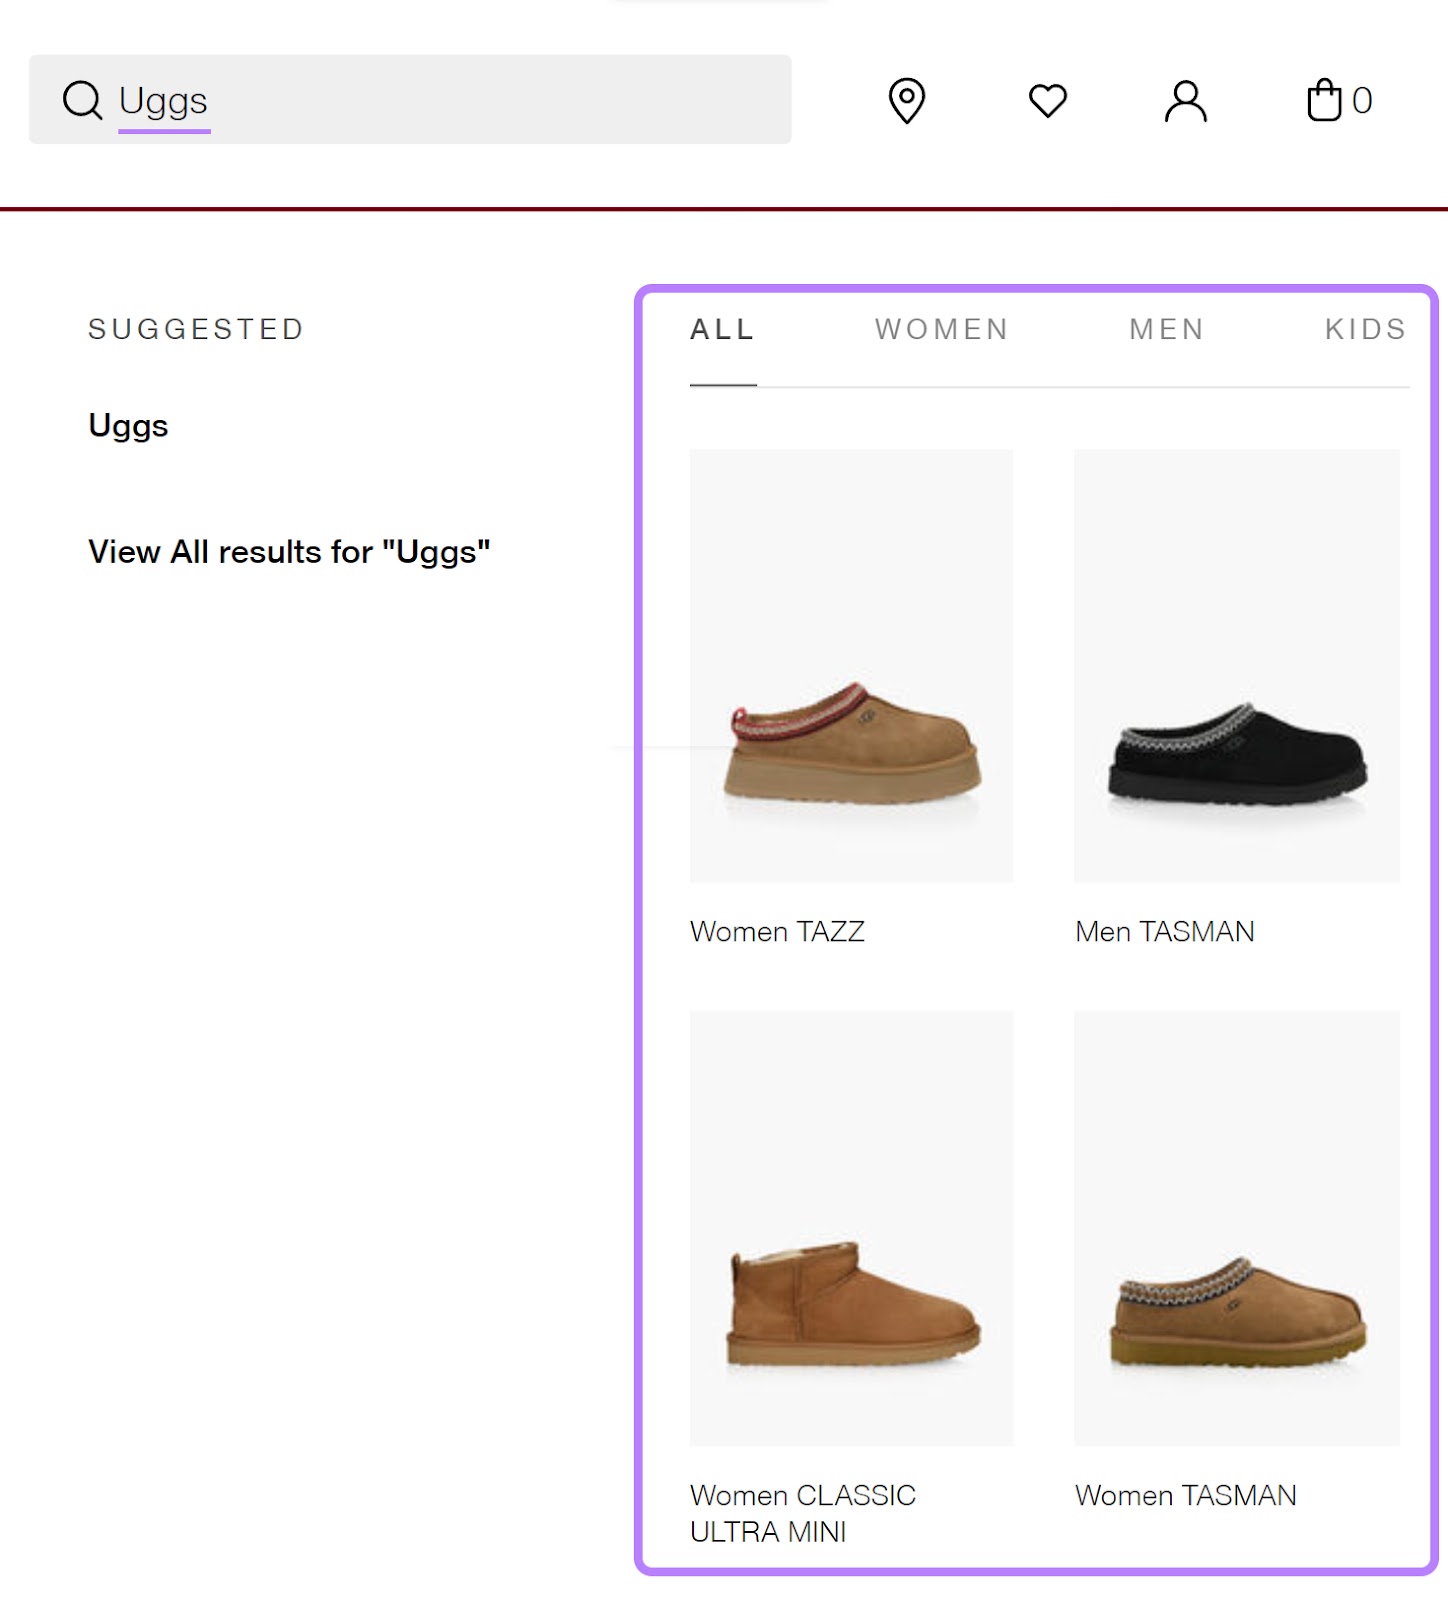 Browns’s search navigation suggestions when typing "Uggs" in the search bar